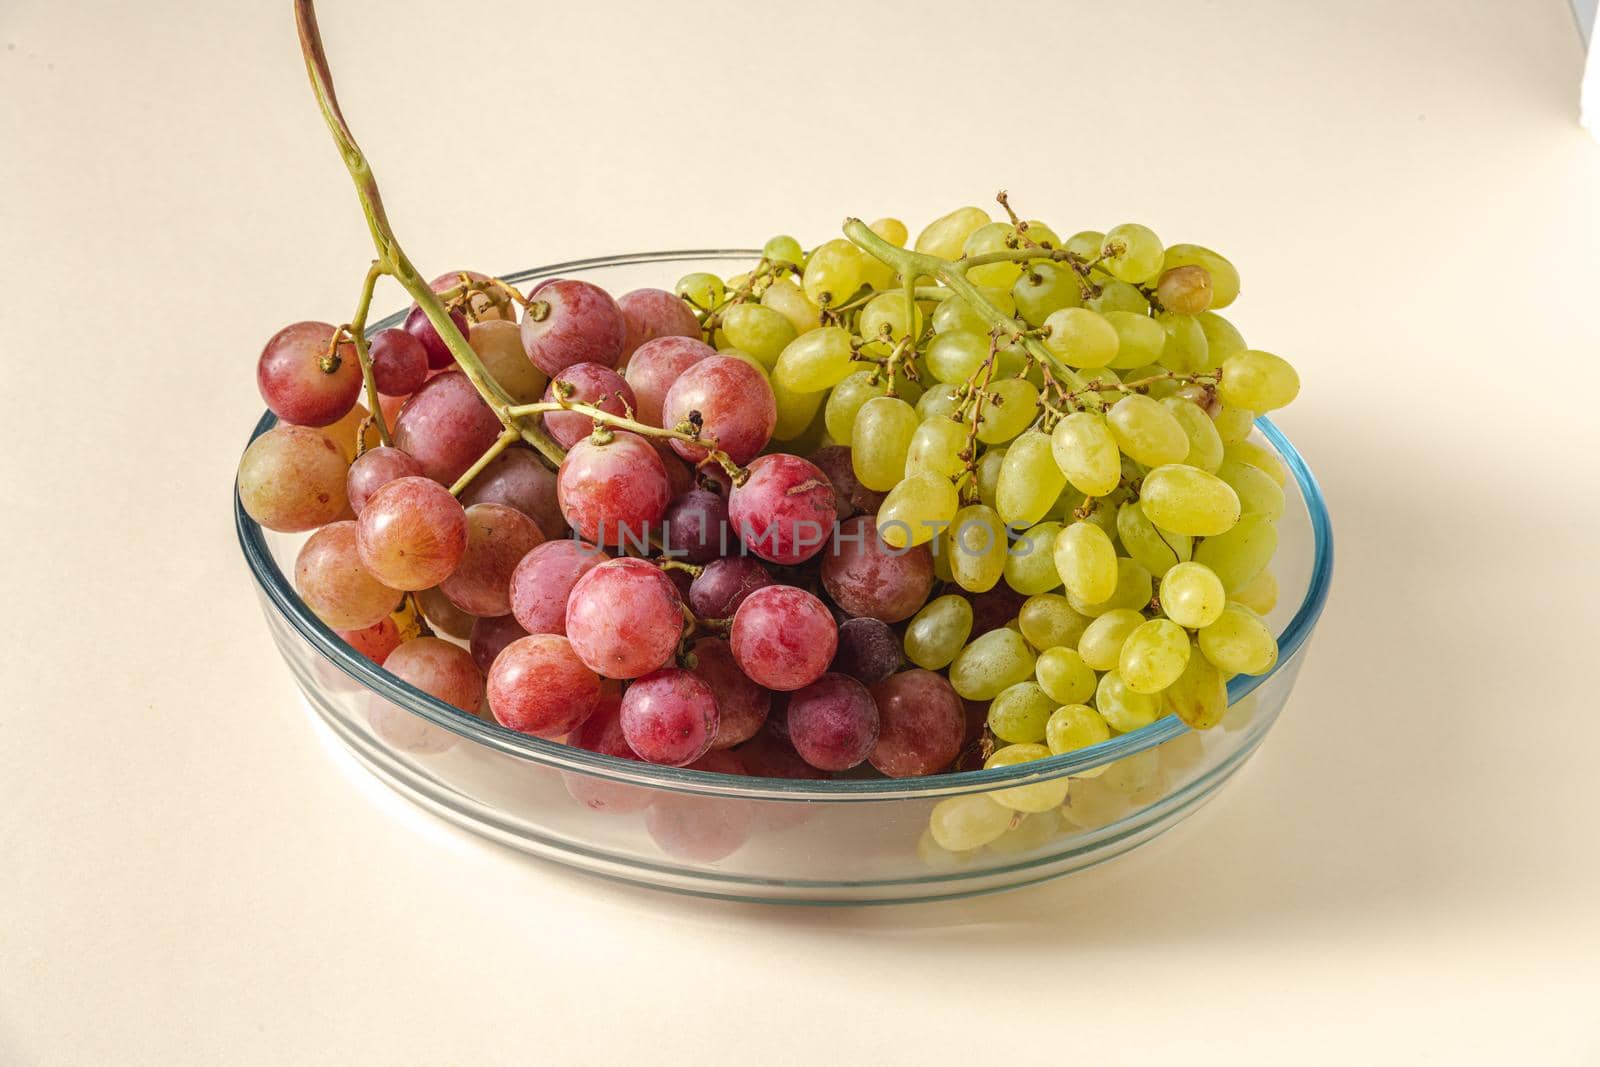 Fresh red and green grapes in a glass bowl. Healthy eating concept by Sonat